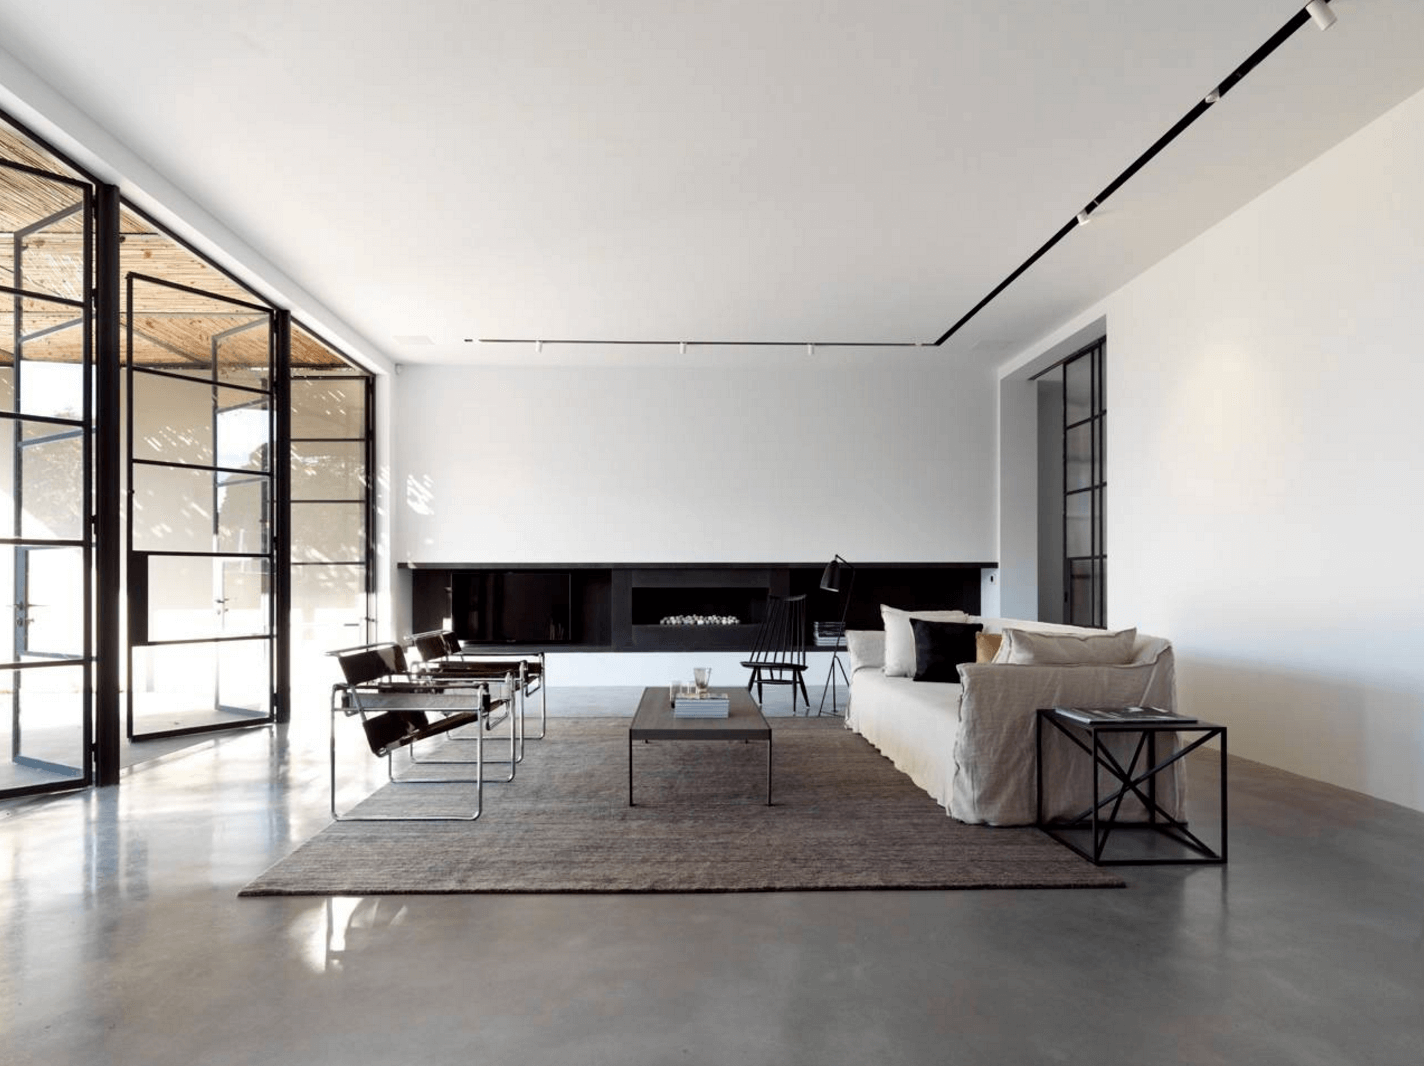 Minimalism in Interior Design: 25 Examples Proving Less Really Is More